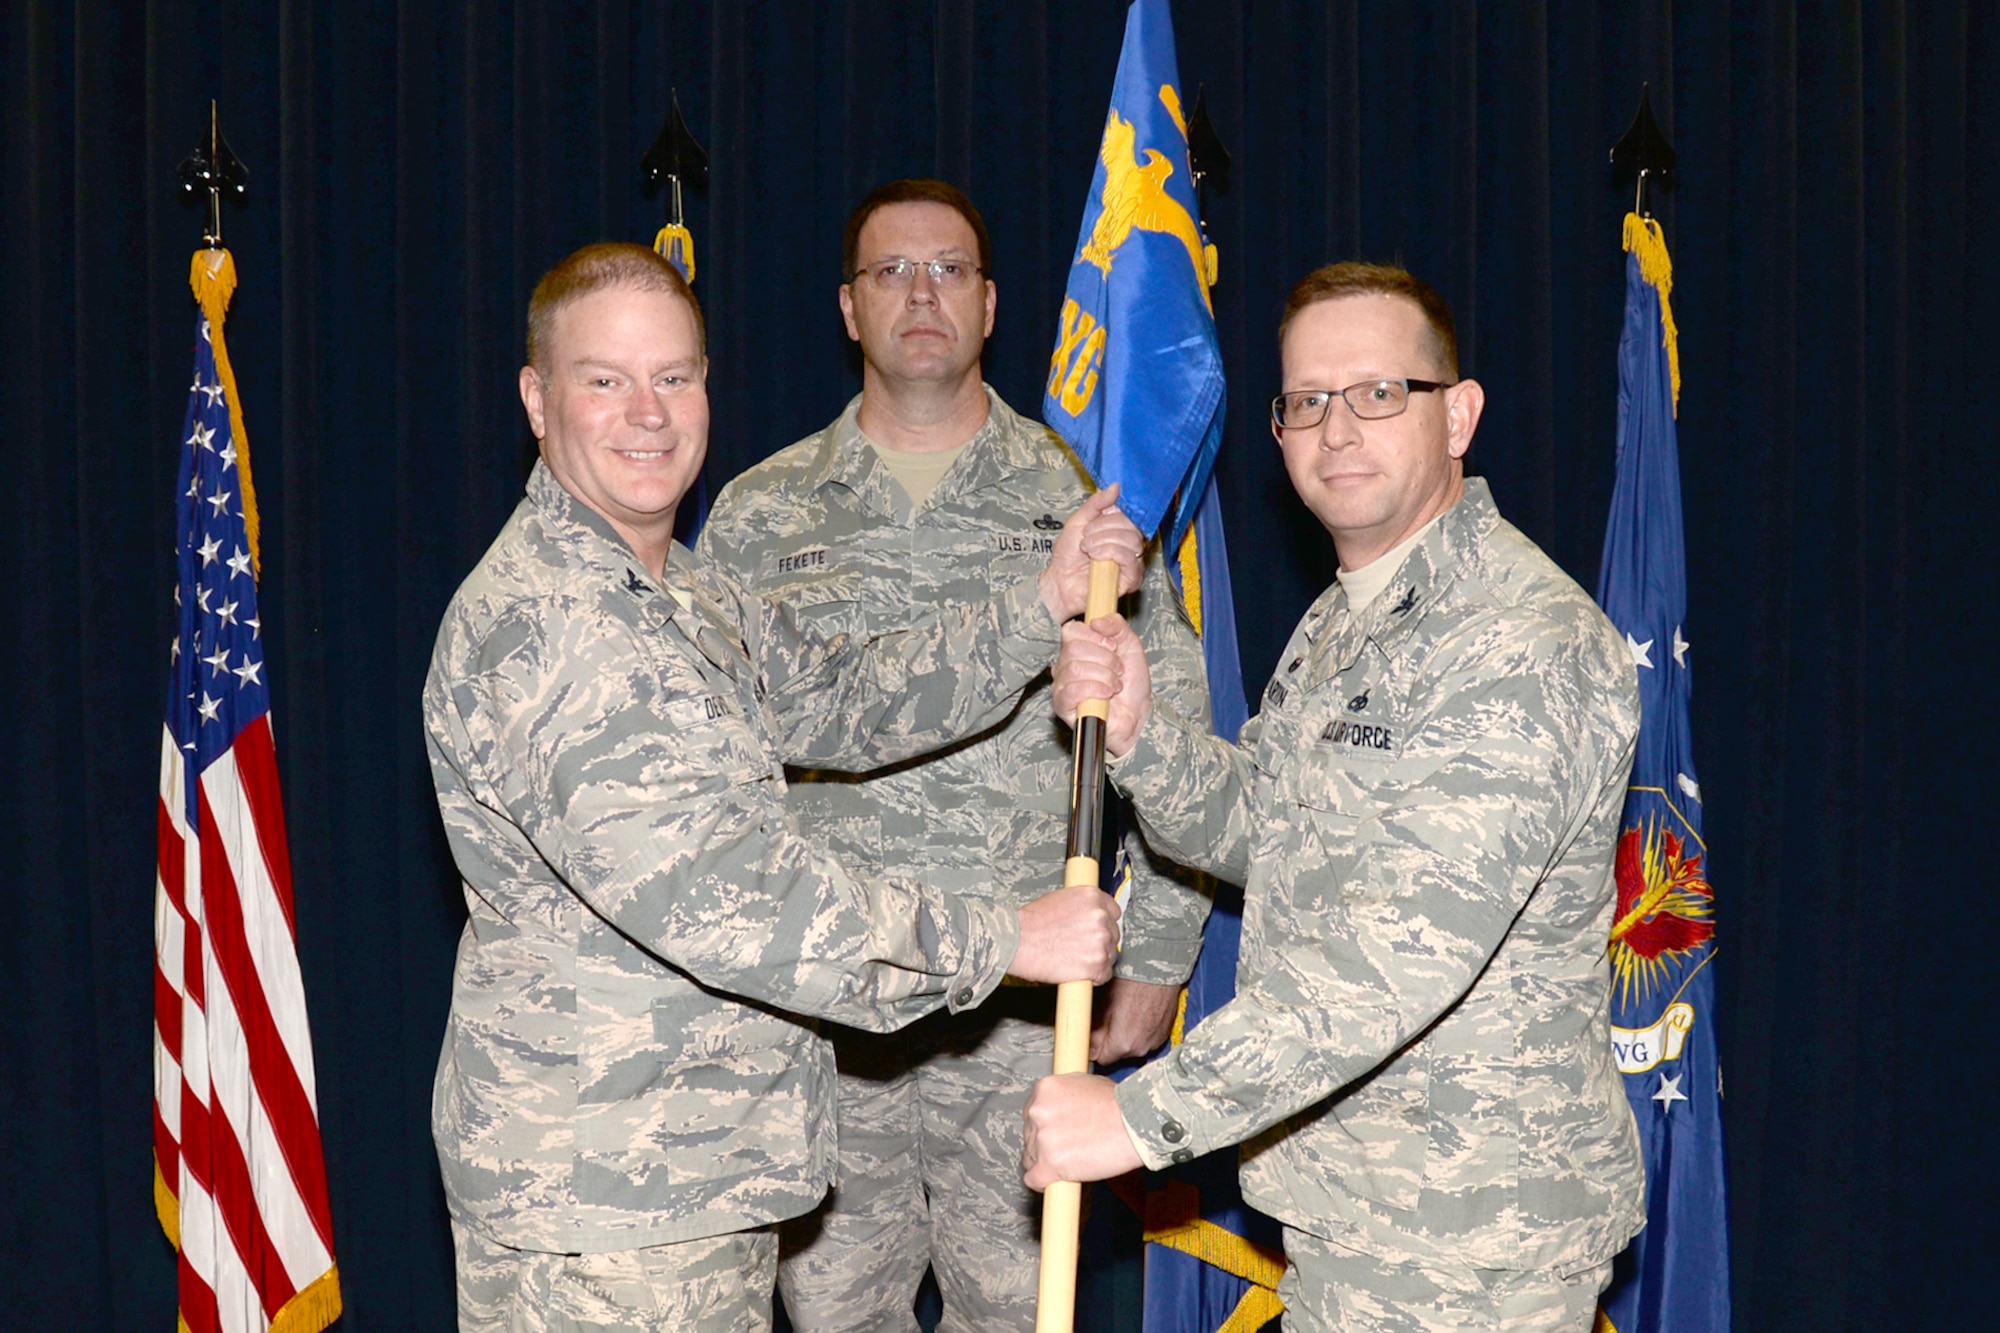 Col. James DeVere, 302nd Airlift Wing commander, passes the 302nd Maintenance Group guidon to the new group commander, Col. Jason Martin, at an assumption of command ceremony, Feb. 11, 2018, at Peterson Air Force Base, Colorado.